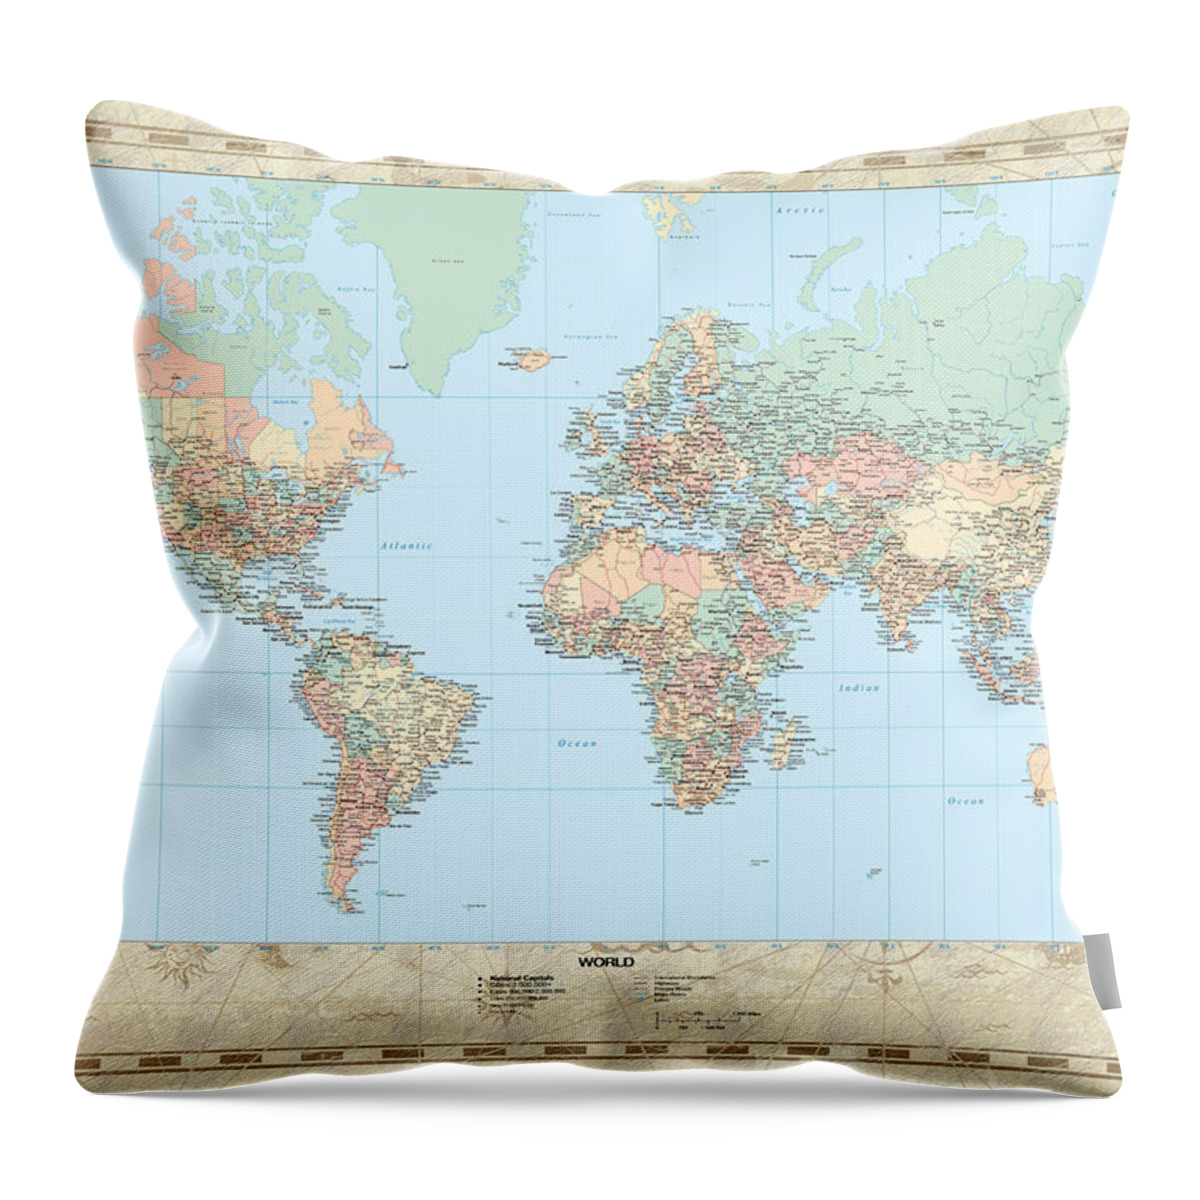 Huge Hi Res Mercator Projection Political World Map Throw Pillow For